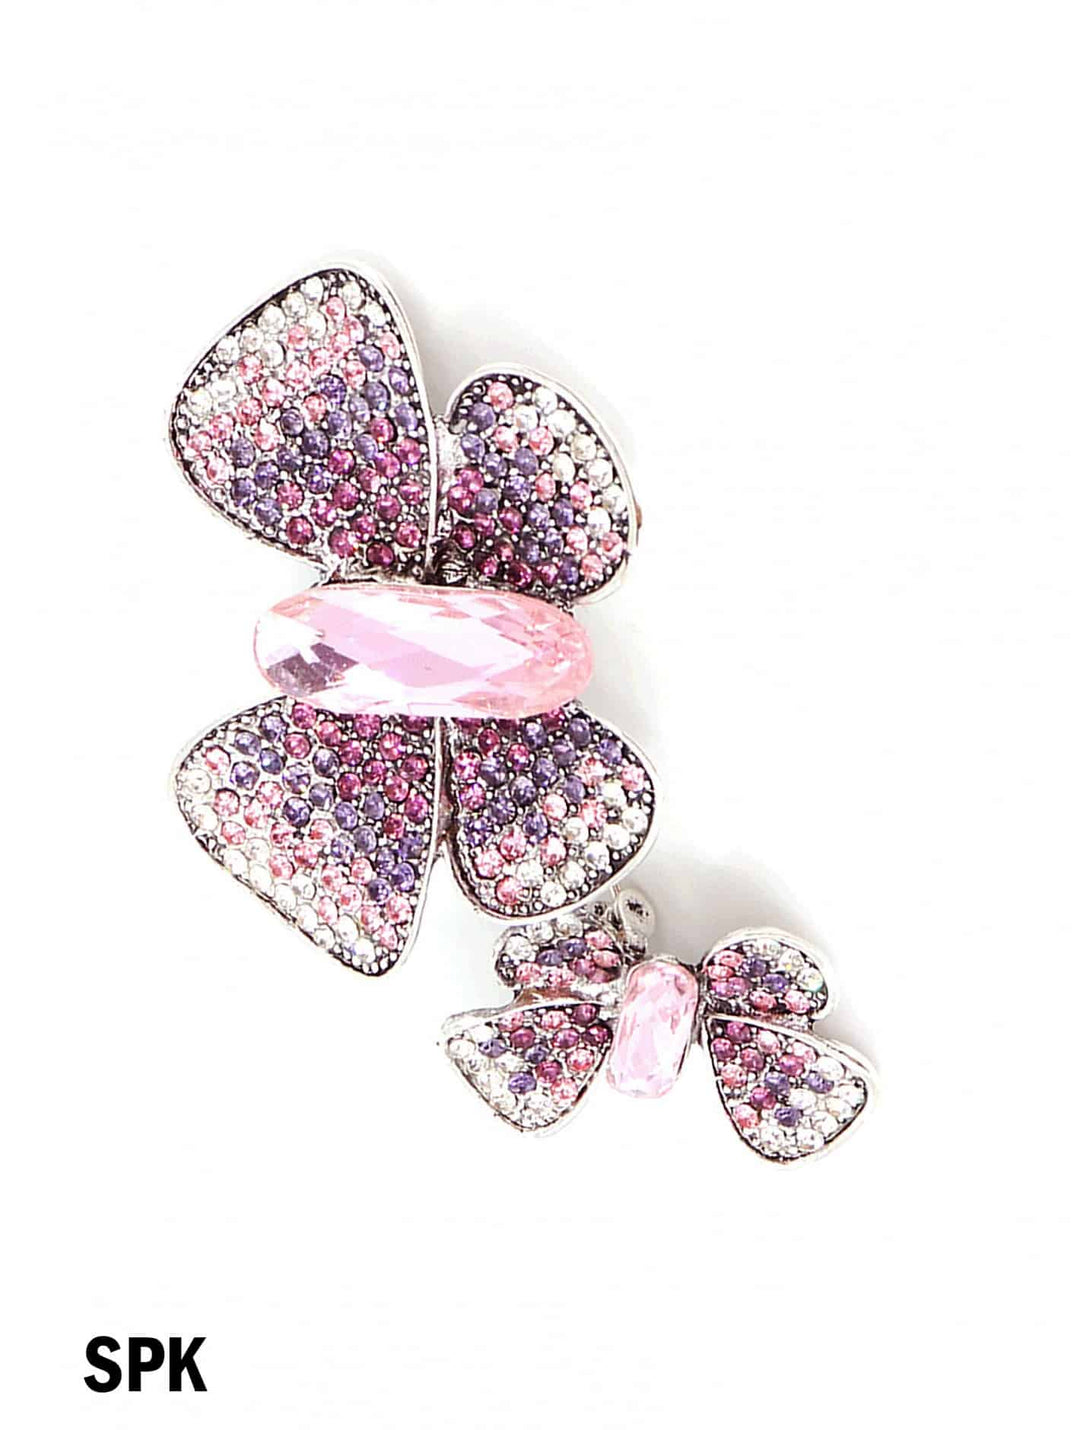 Butterfly Brooch With Rhinestone and Gem